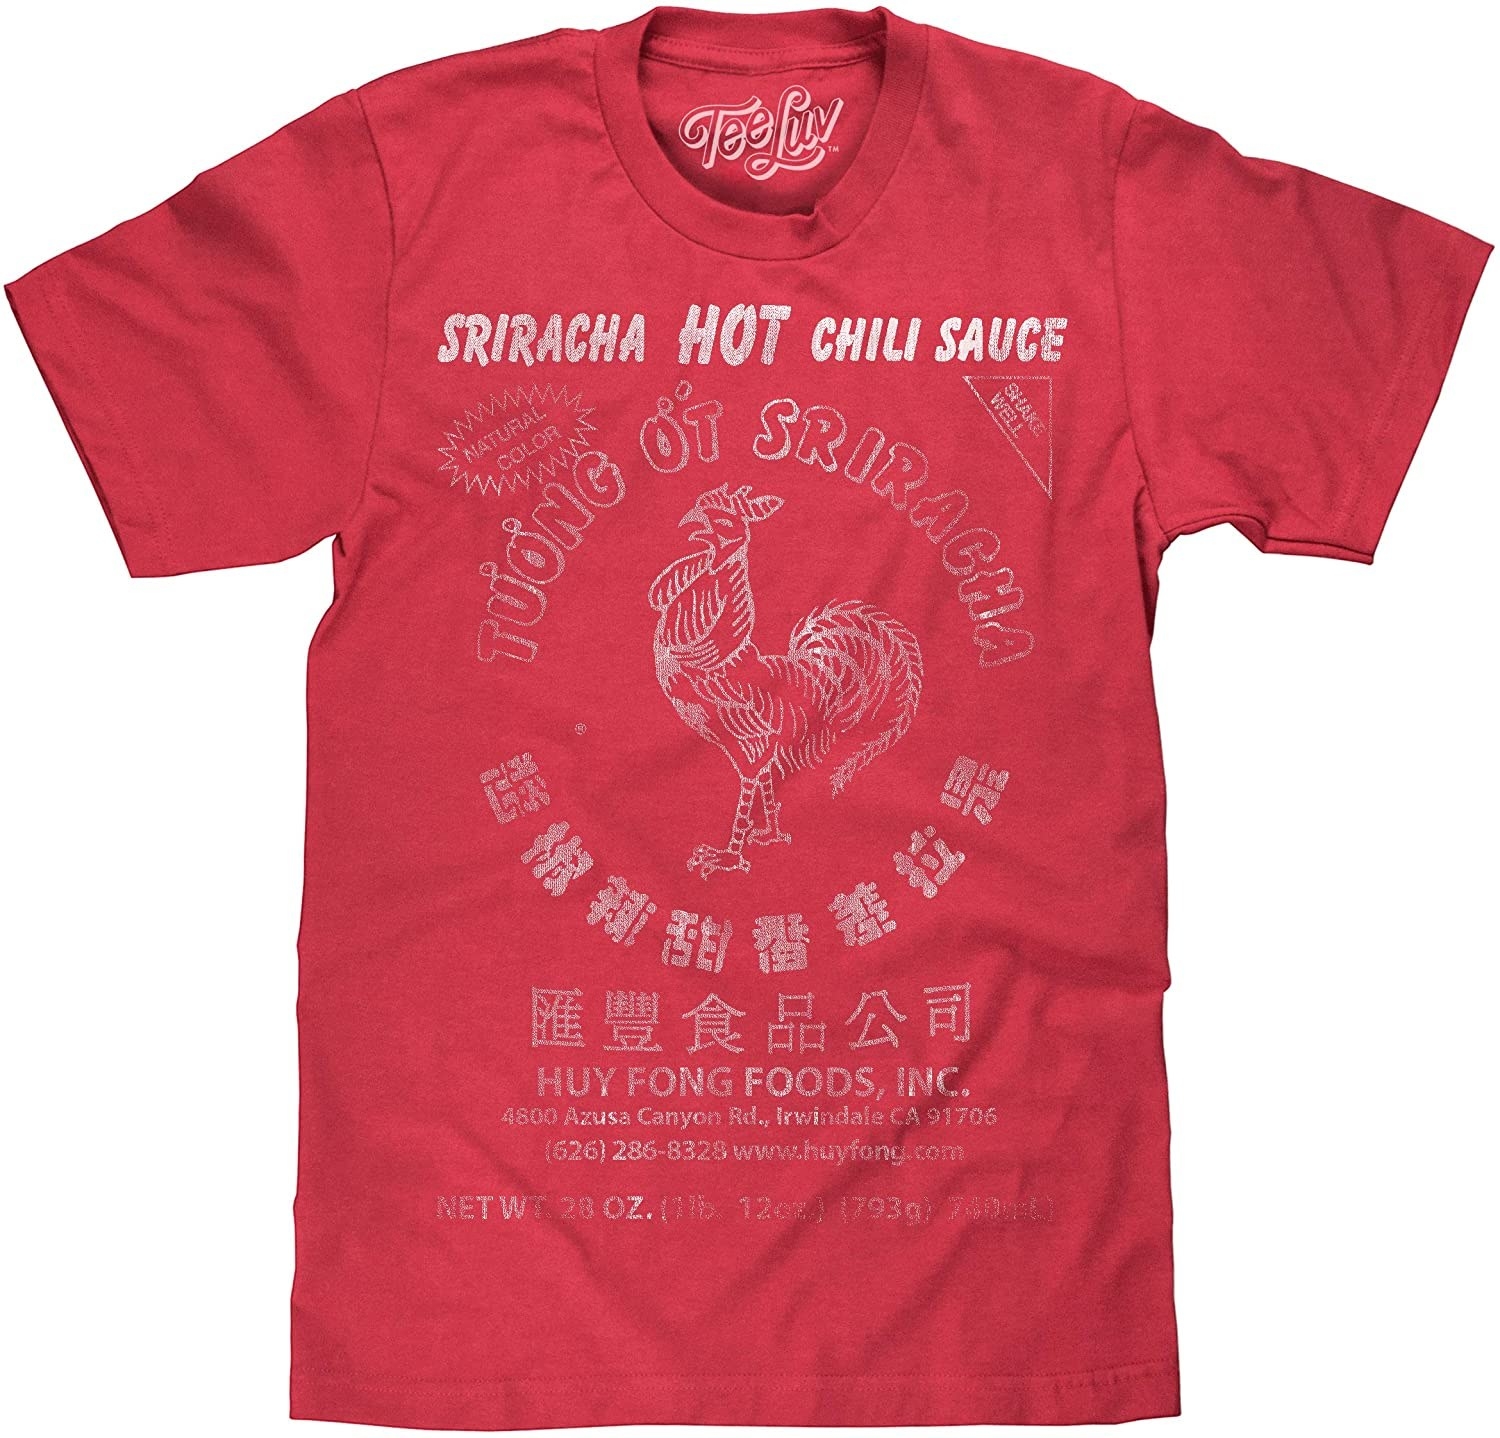 A red t-shirt with the Sriracha hot chili sauce logo